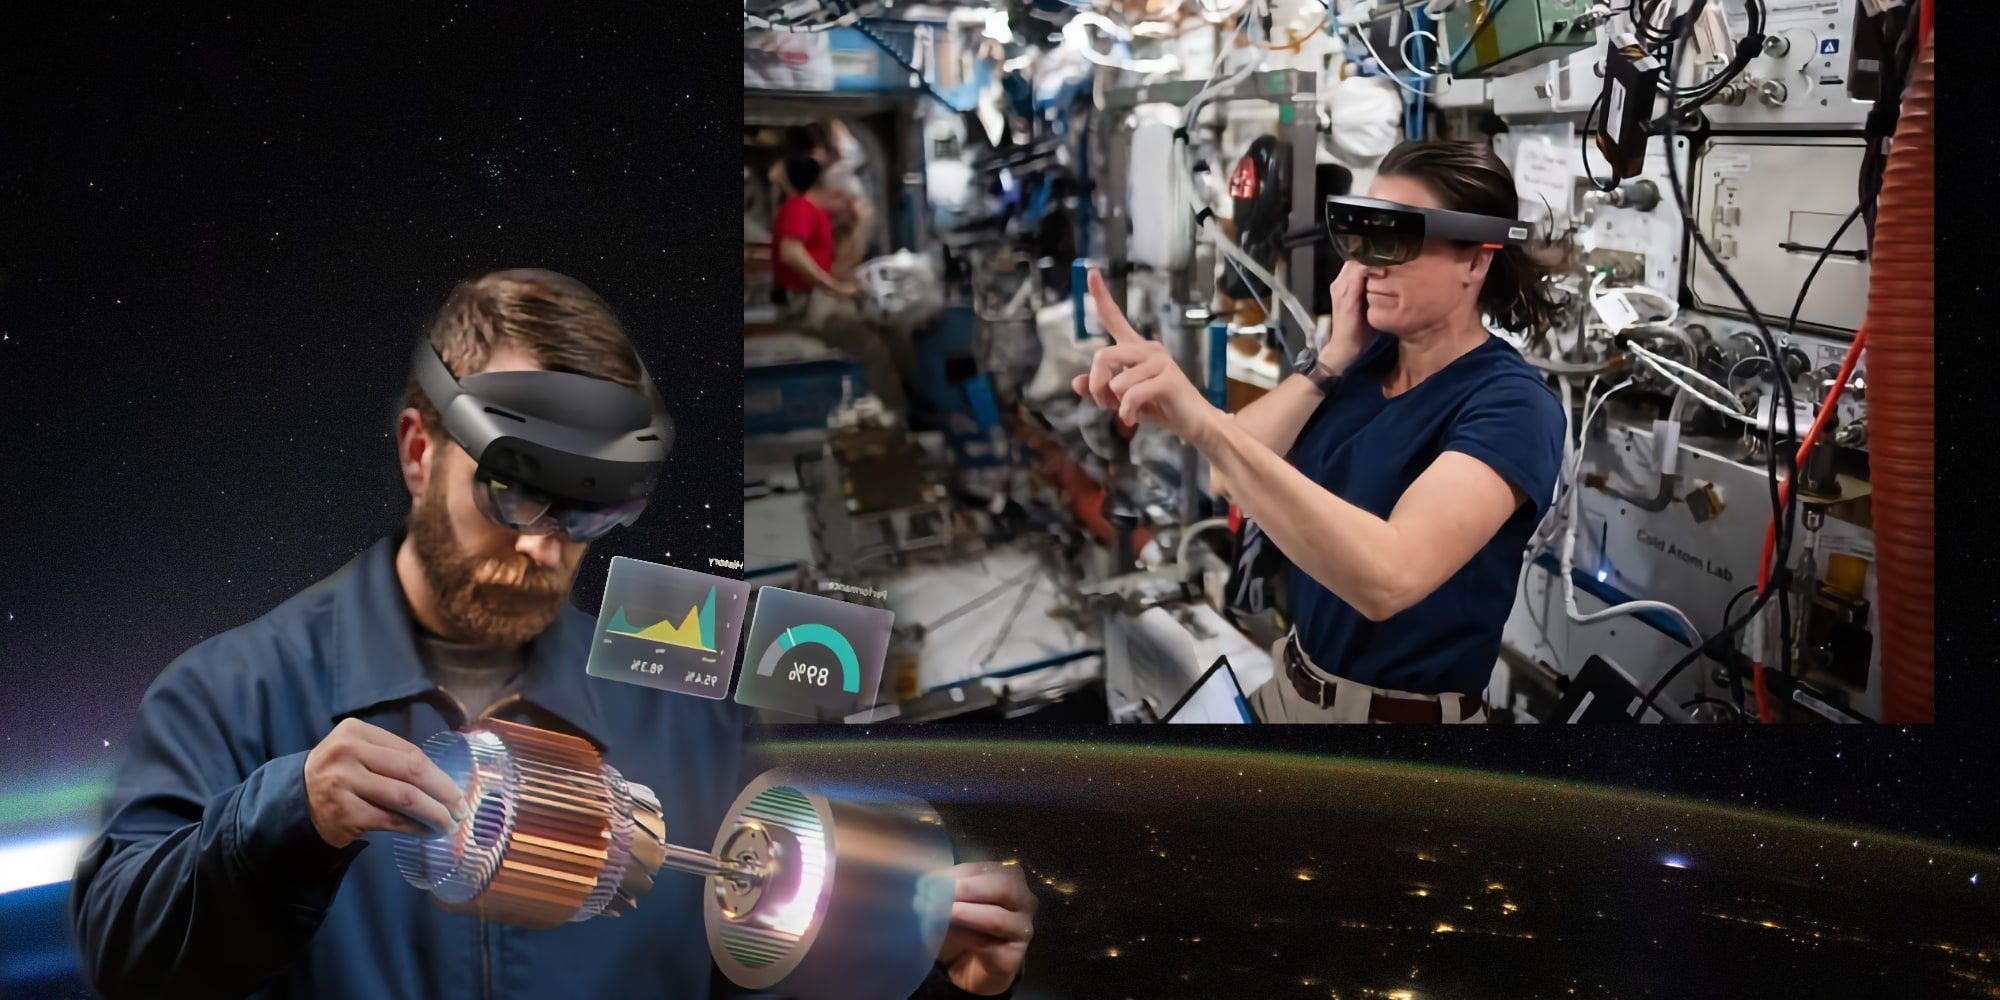 NASA Astronaut Used Microsofts HoloLens To Perform Hardware Upgrade In AR